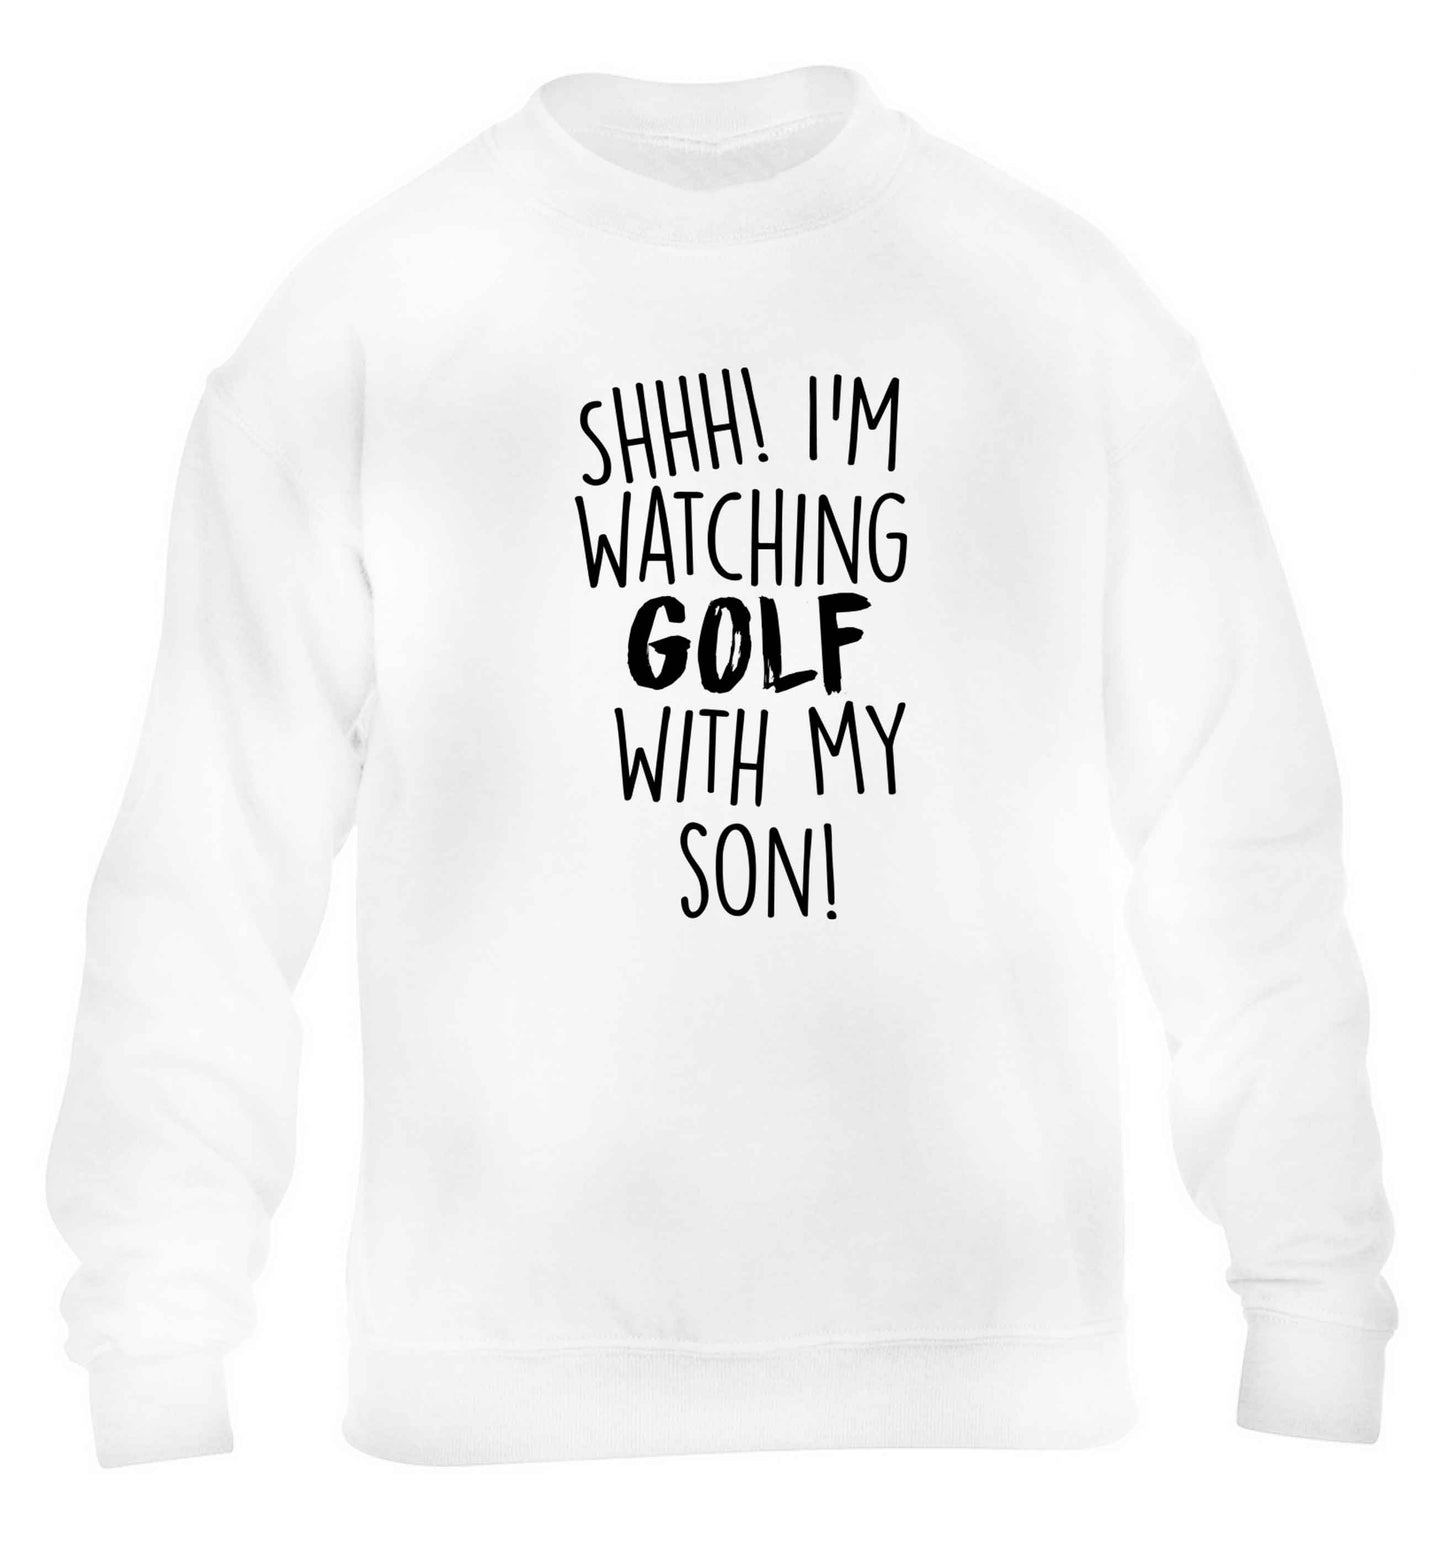 Shh I'm watching golf with my son children's white sweater 12-13 Years